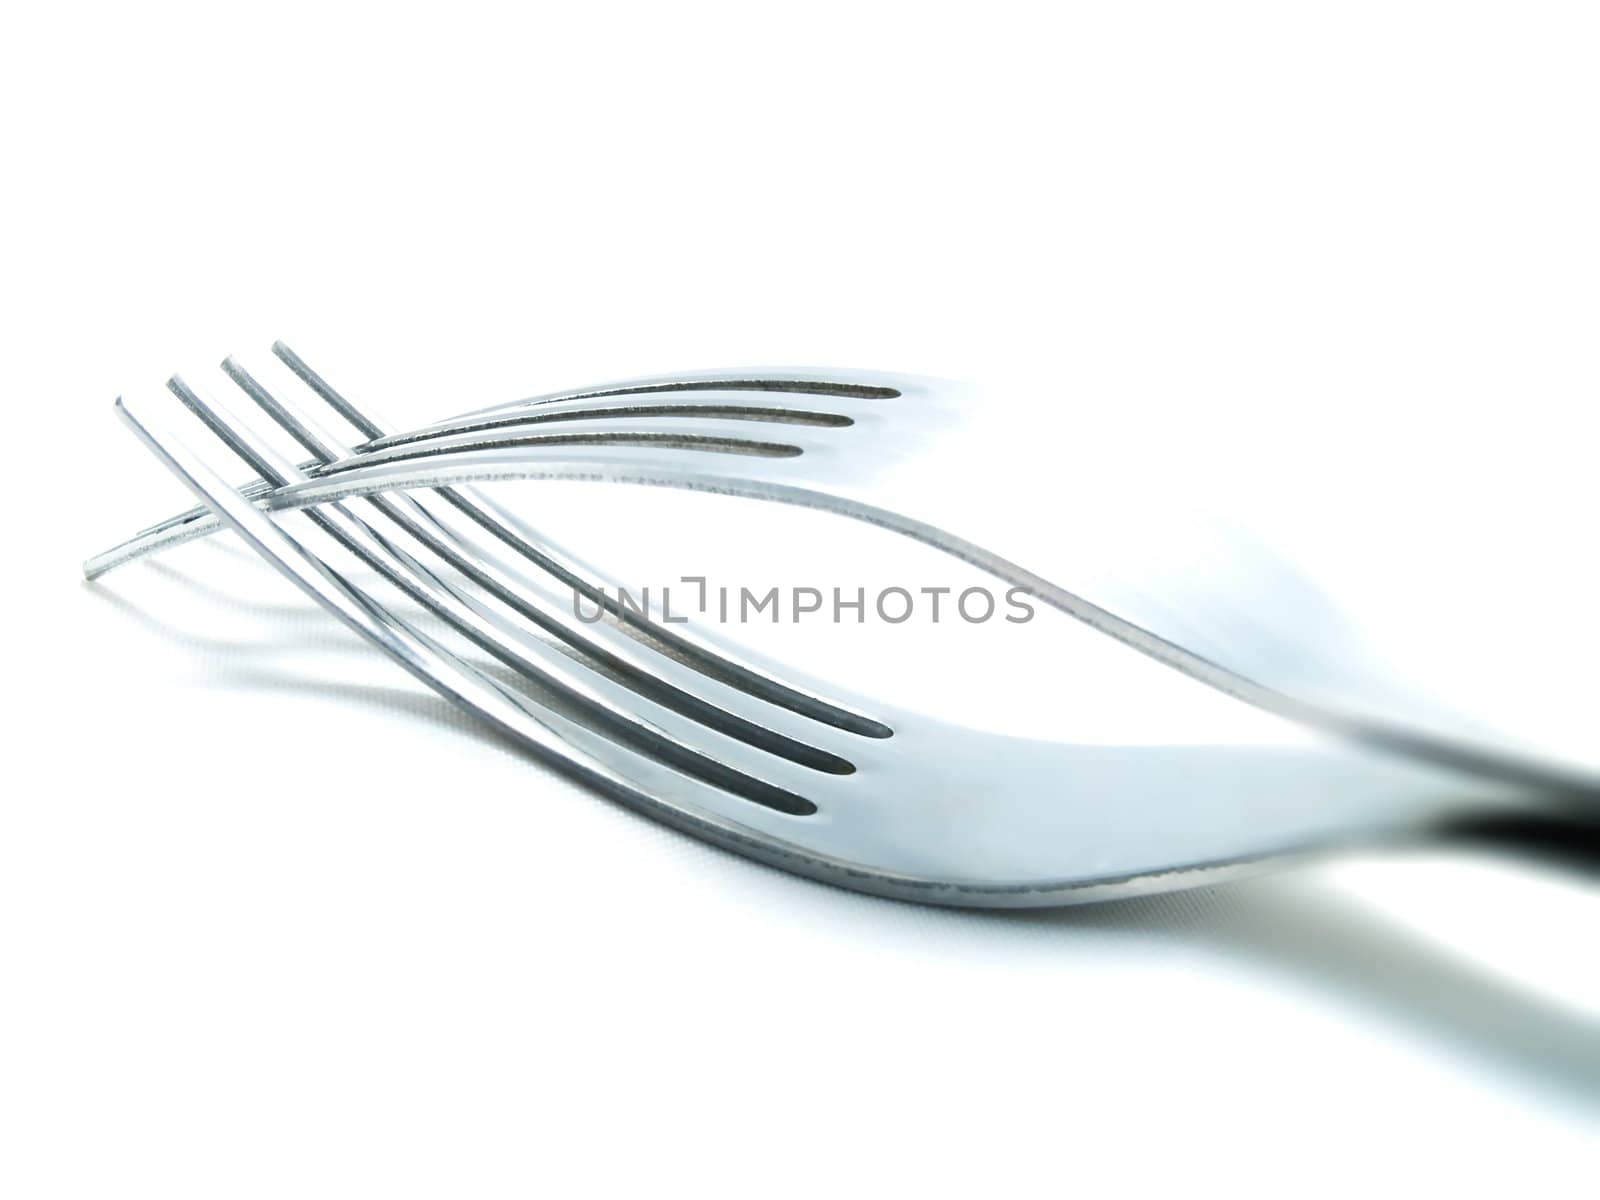 Two forks on a white background